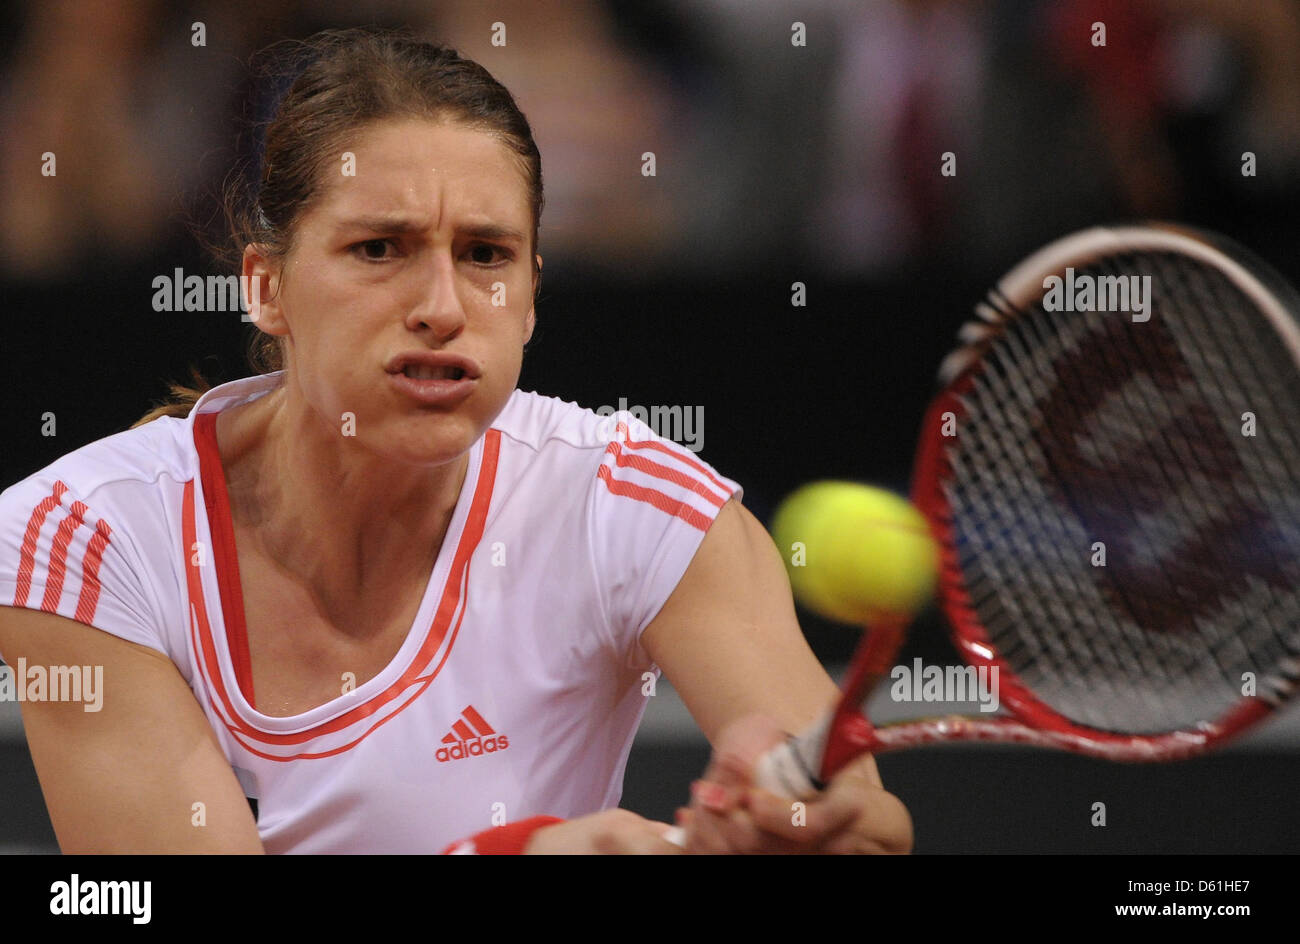 German tennis player Andrea Petkovic hits the ball during the match against  Barrois from Germany at the WTA tournament in Stuttgart, Germany, 24 April  2012. Photo: Marijan Murat Stock Photo - Alamy